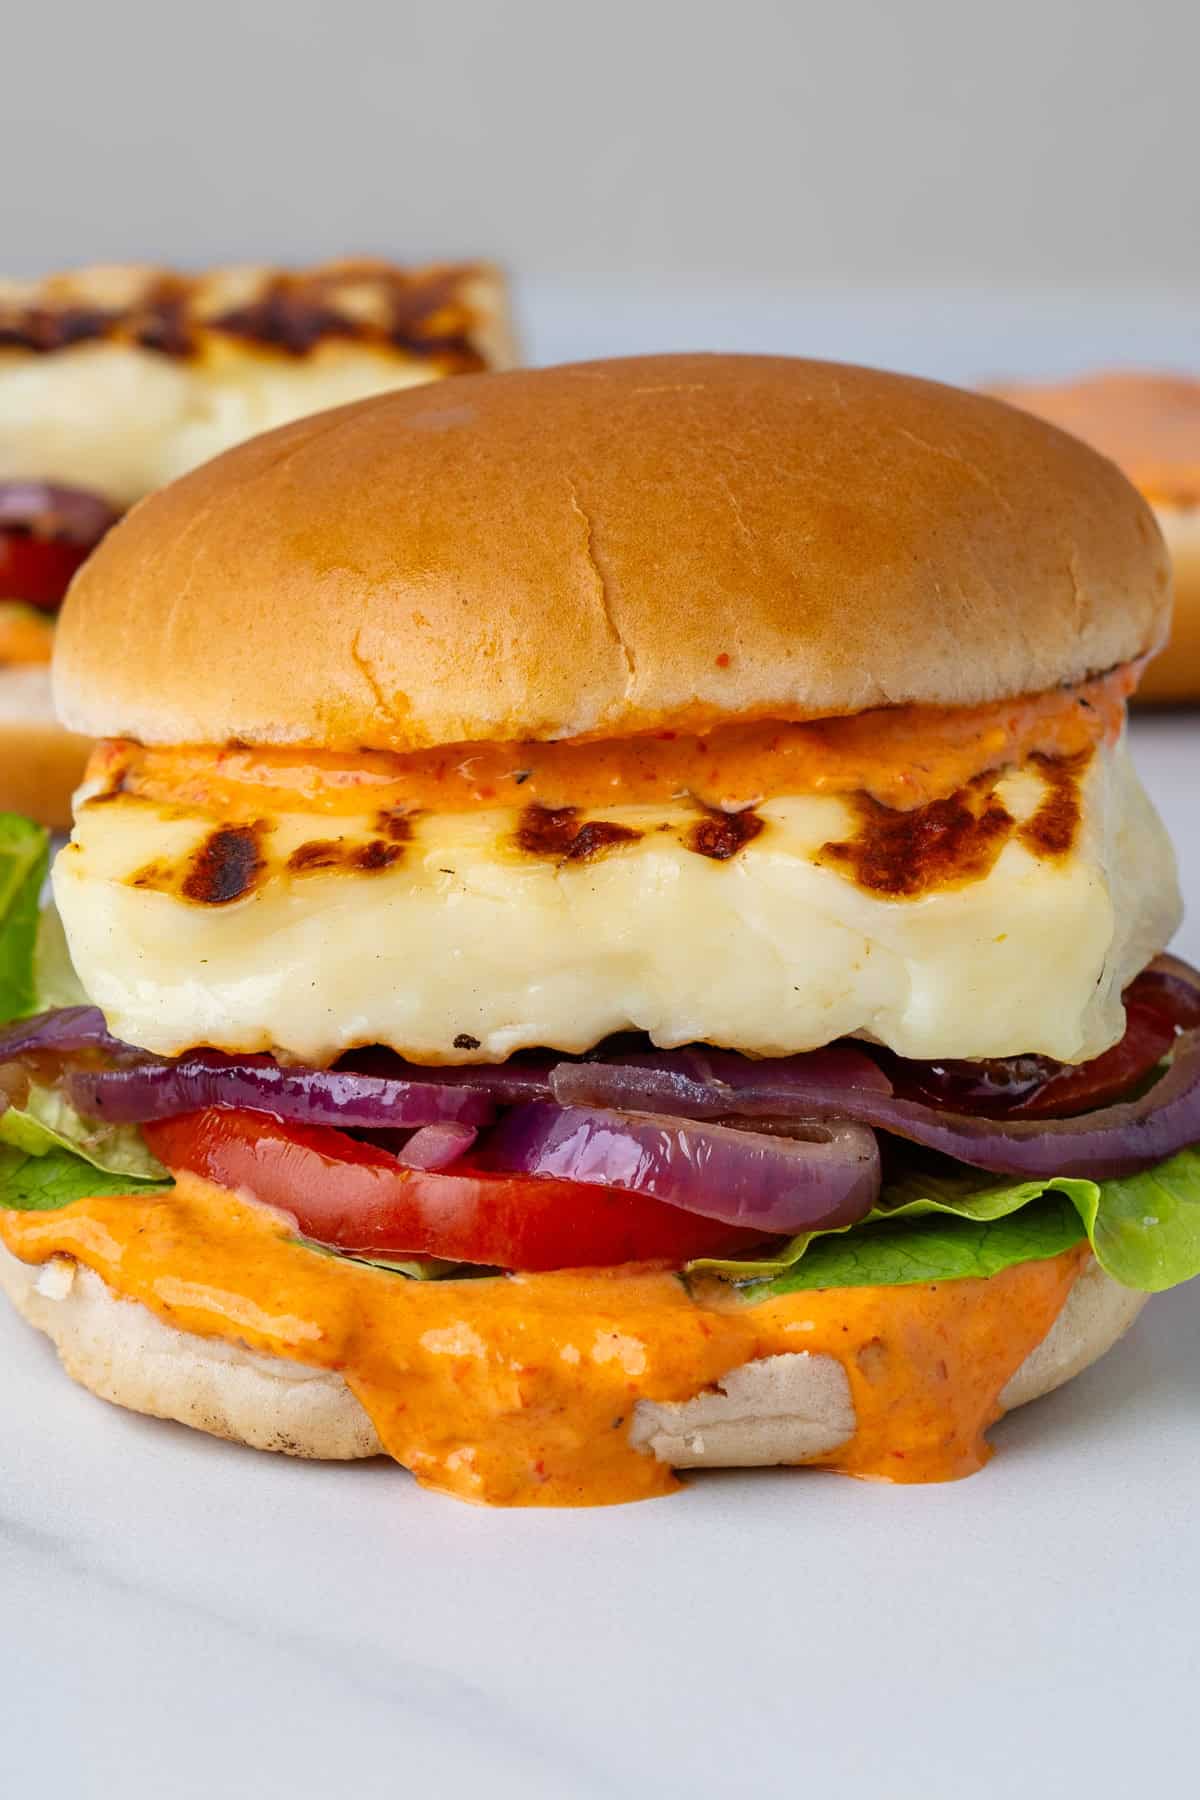 Halloumi burger with a smoky red pepper sauce and veggies